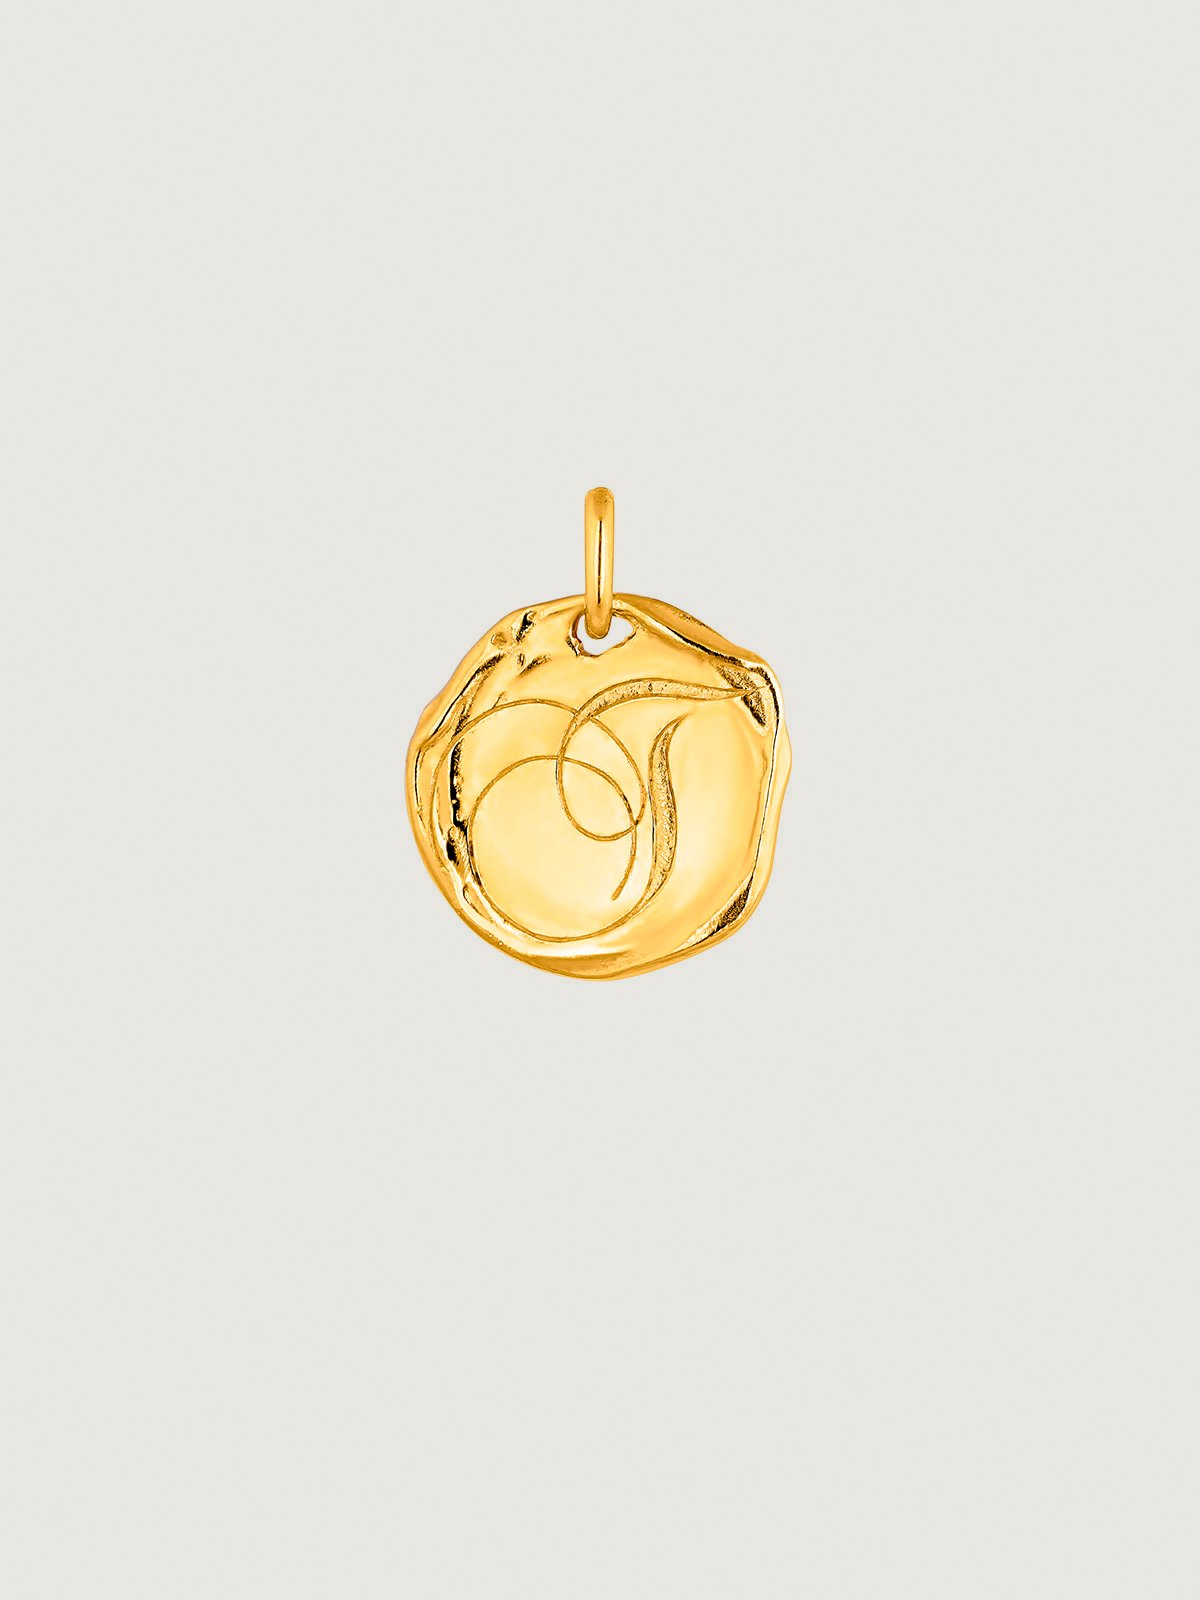 Handcrafted 925 silver charm plated in 18K yellow gold with initial T.